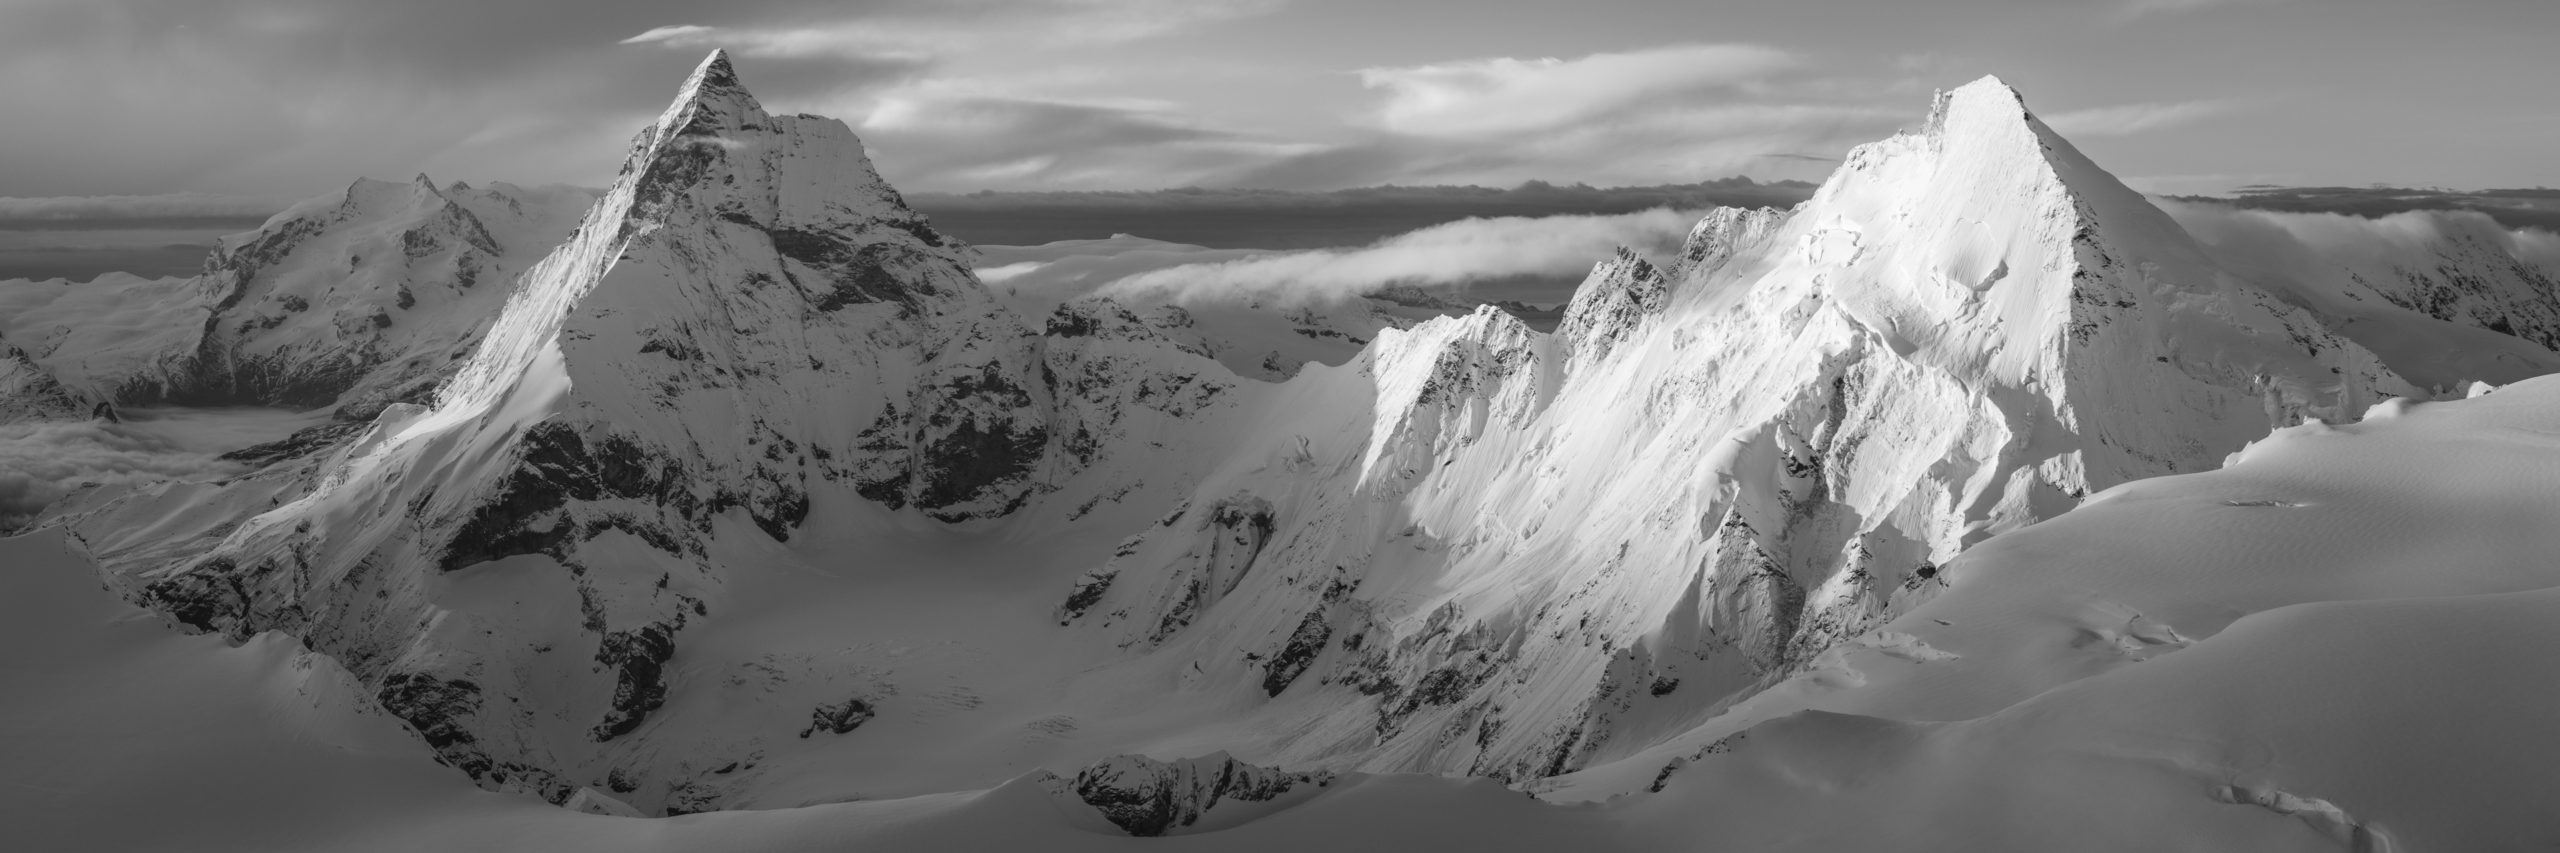 Black and white panoramic photo of the Matterhorn and The Dent d'Hérens